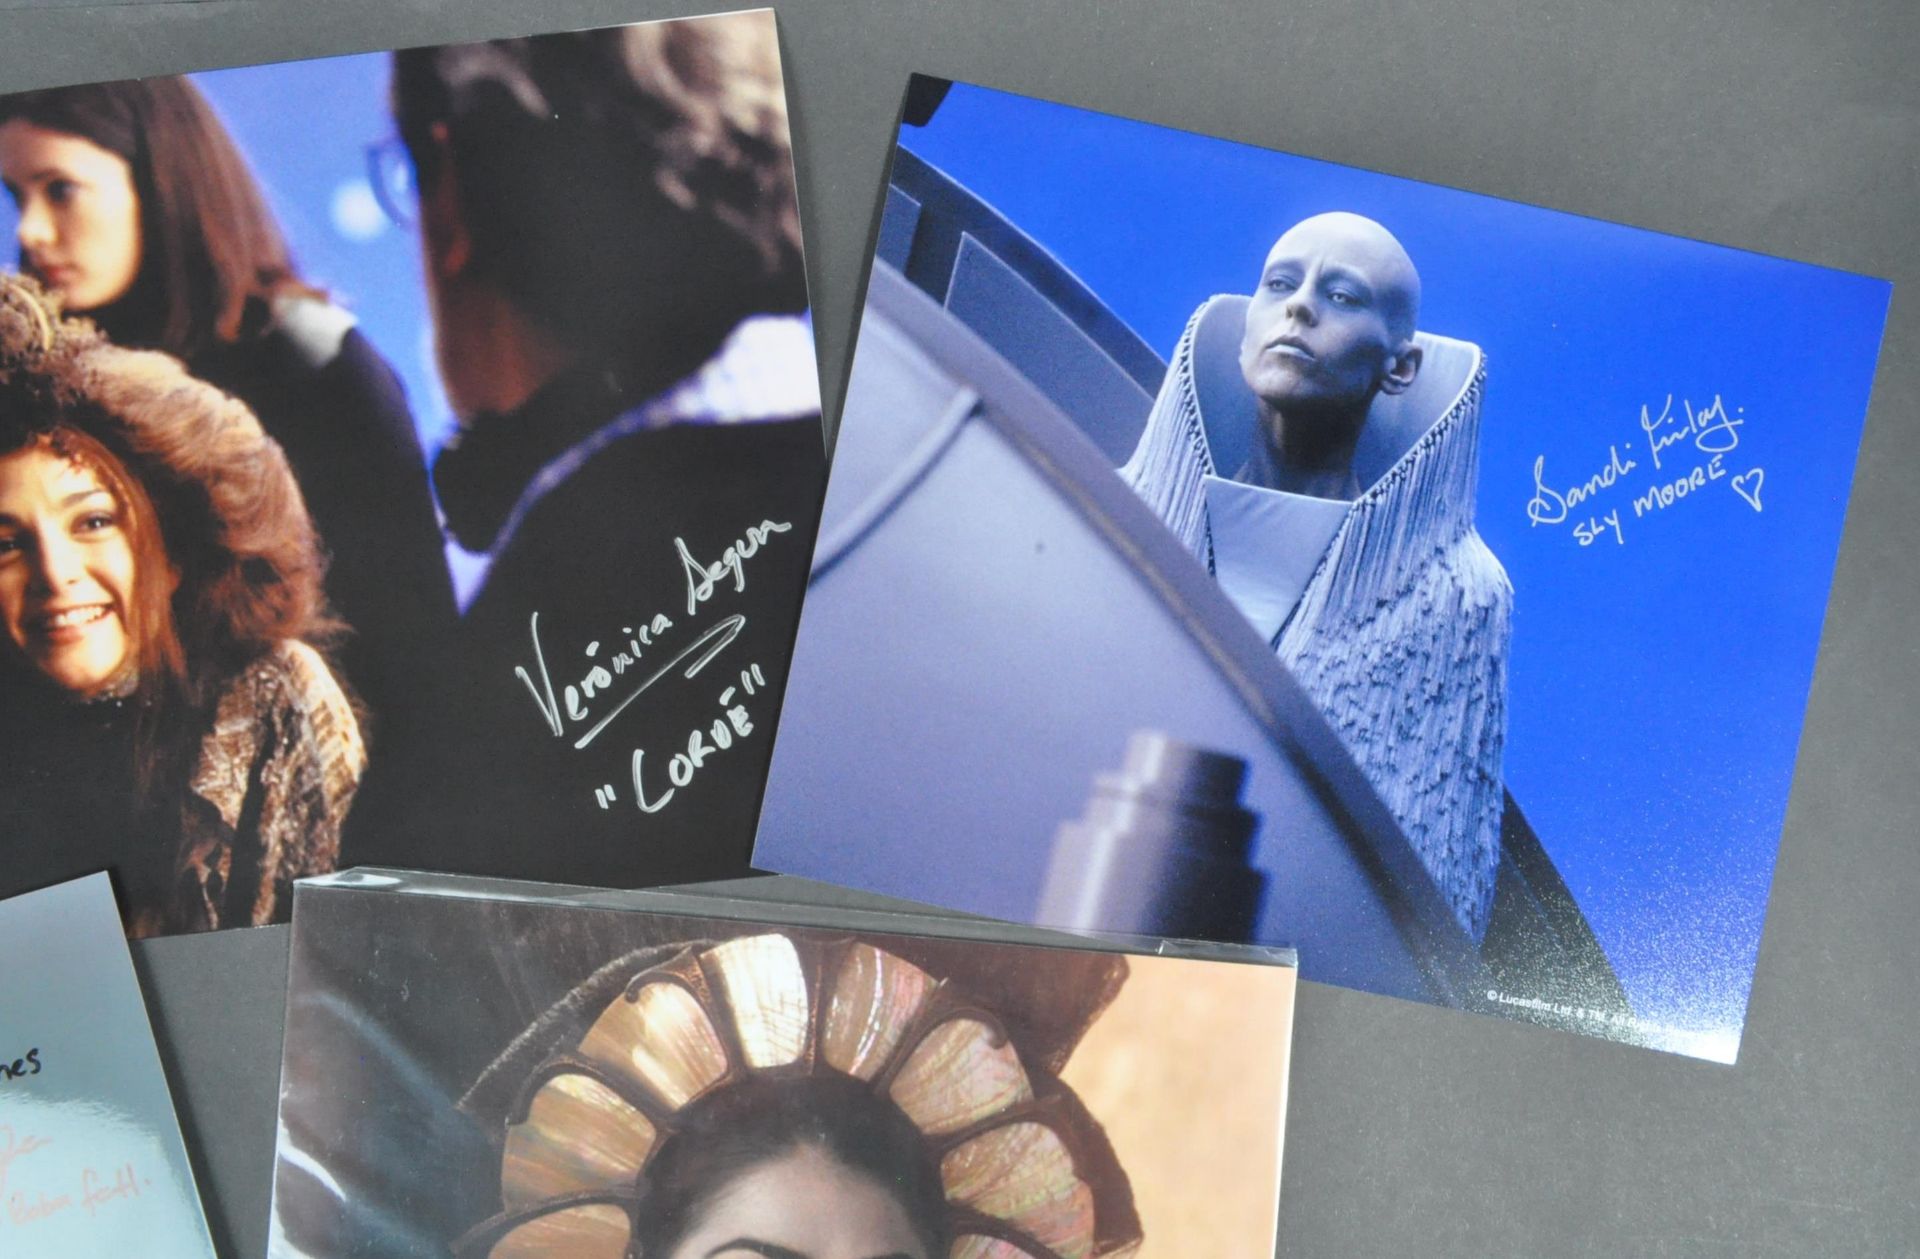 STAR WARS - ATTACK OF THE CLONES - SIGNED 8X10" COLLECTION - Image 4 of 4